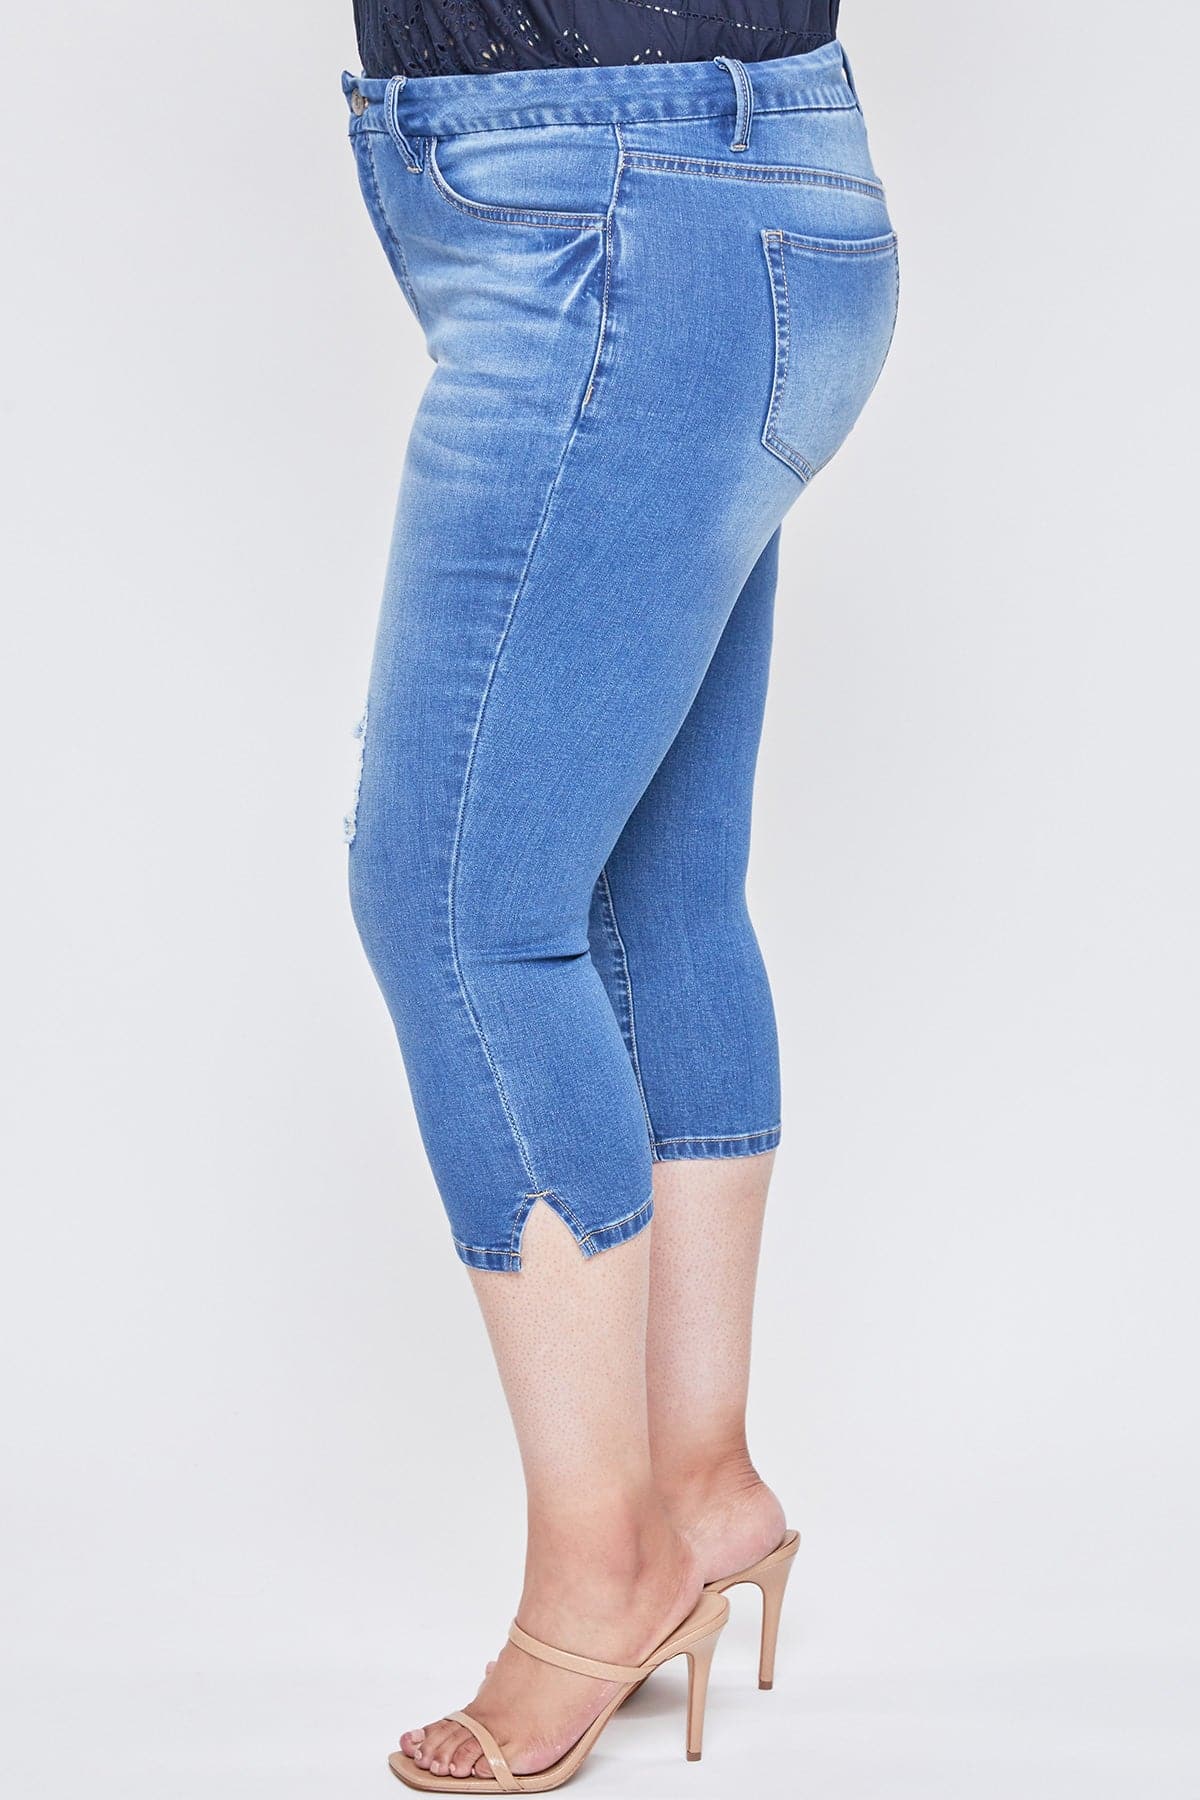 Missy Slim Stretch Cuffed Capri Jeans, Pack Of 12 from Royalty for